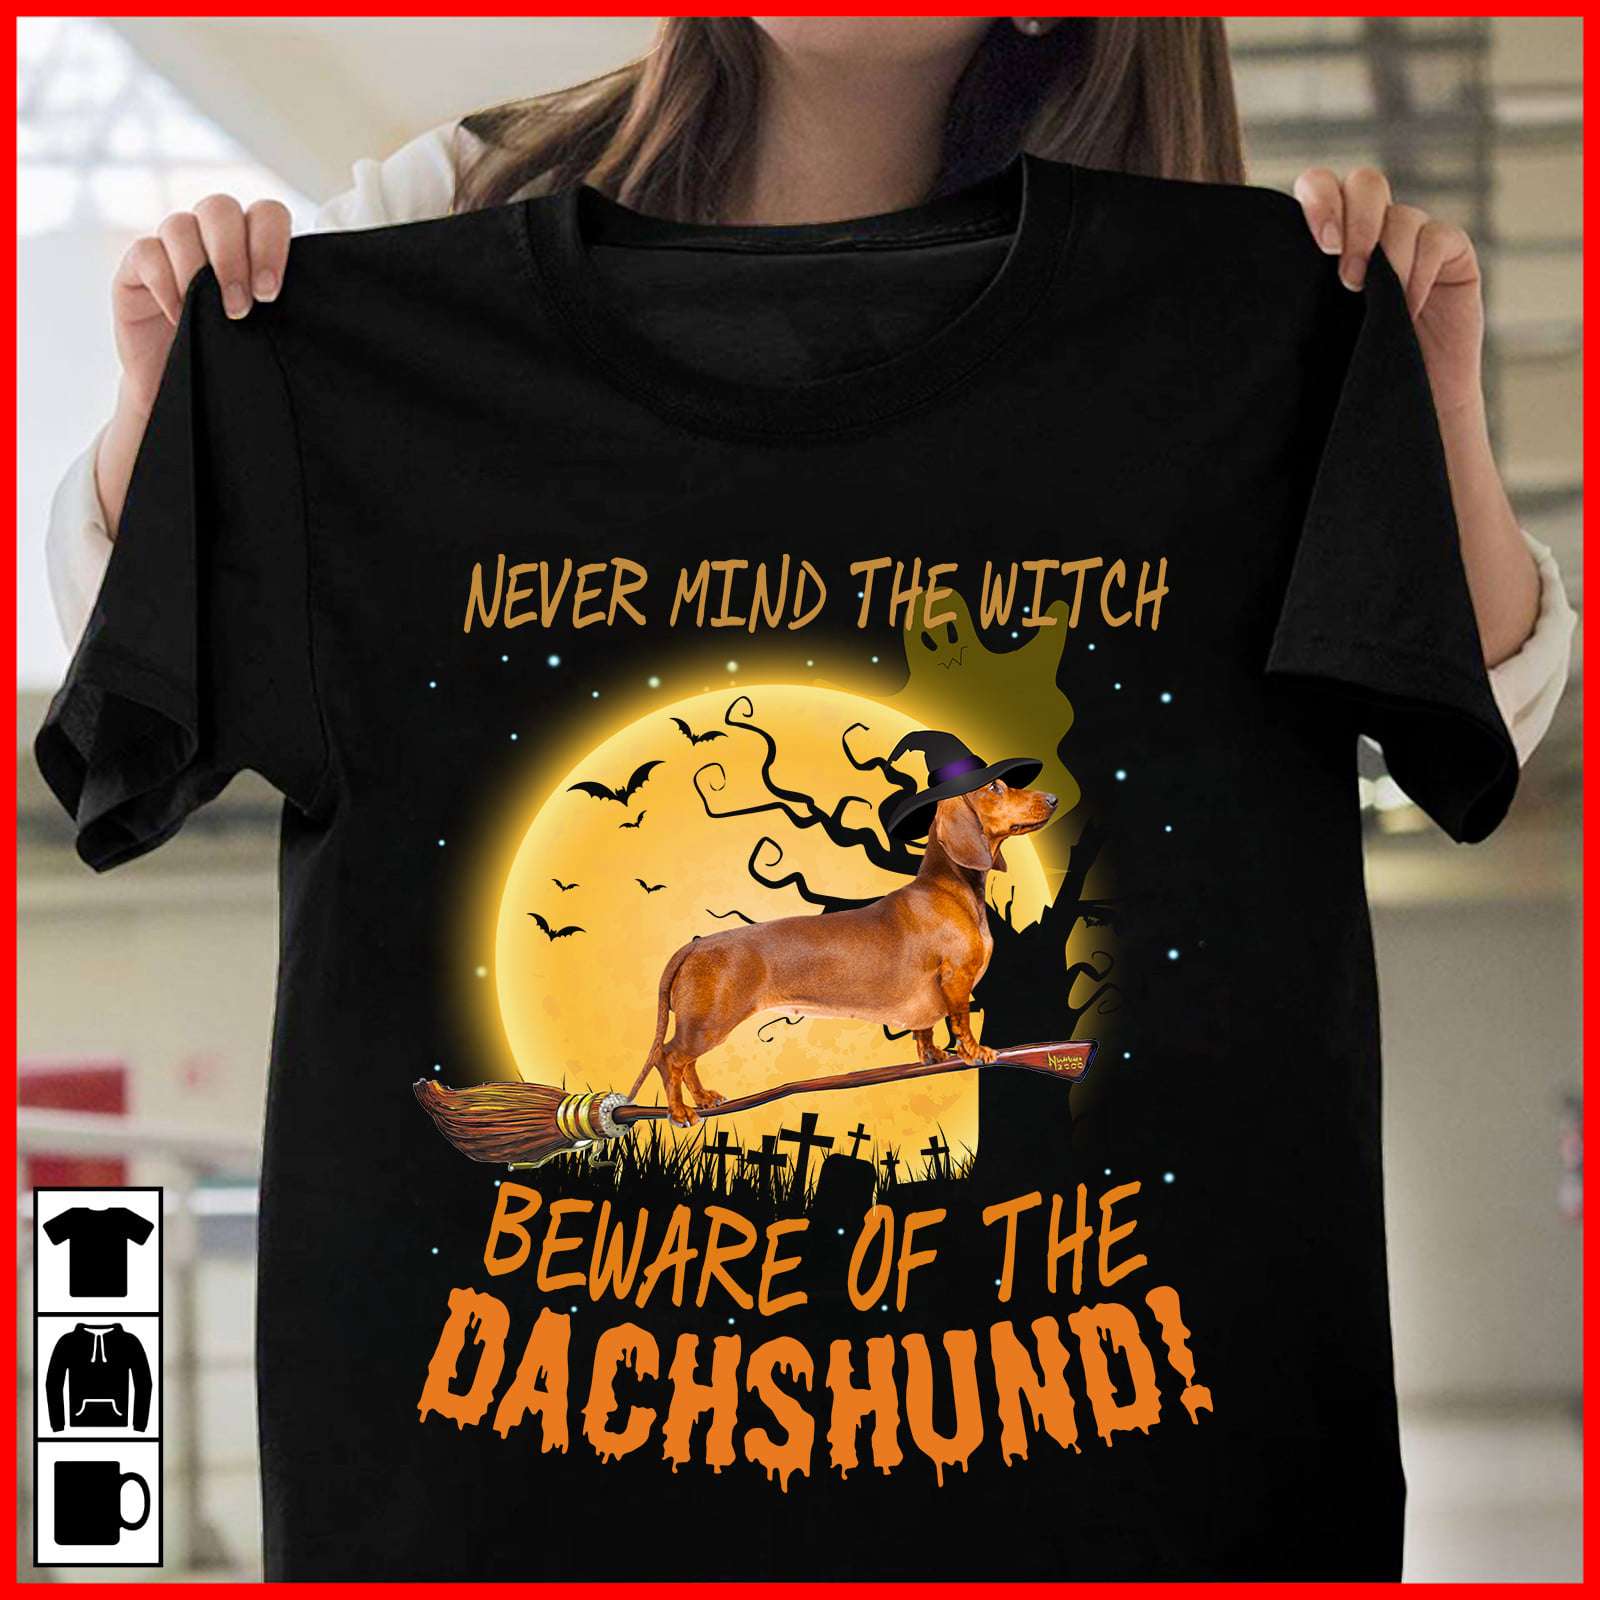 Never mind the witch beware of the Dachshund - Dachshund witch broom, Halloween witch